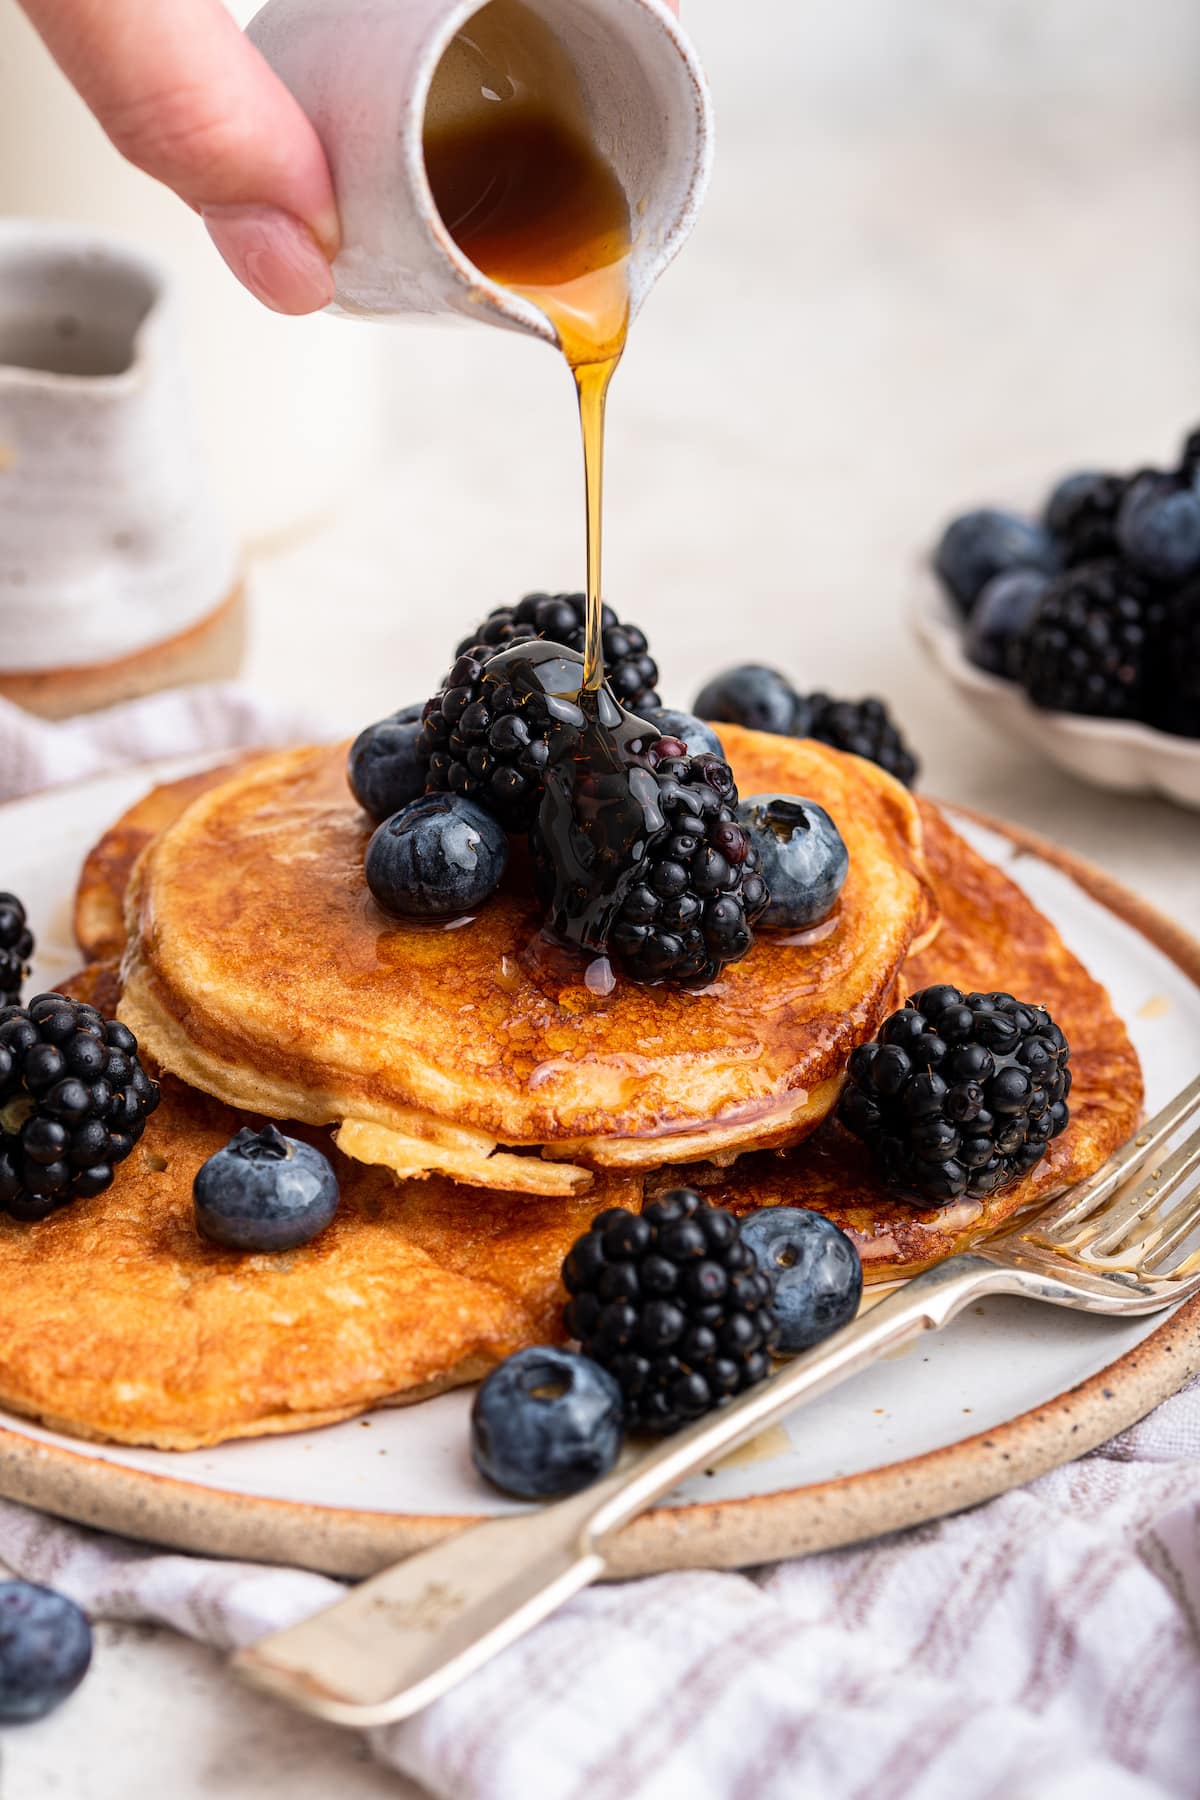 Maple syrup being poured over a stack of cottage cheese pancakes that are topped off with fresh blueberries and blackberries.